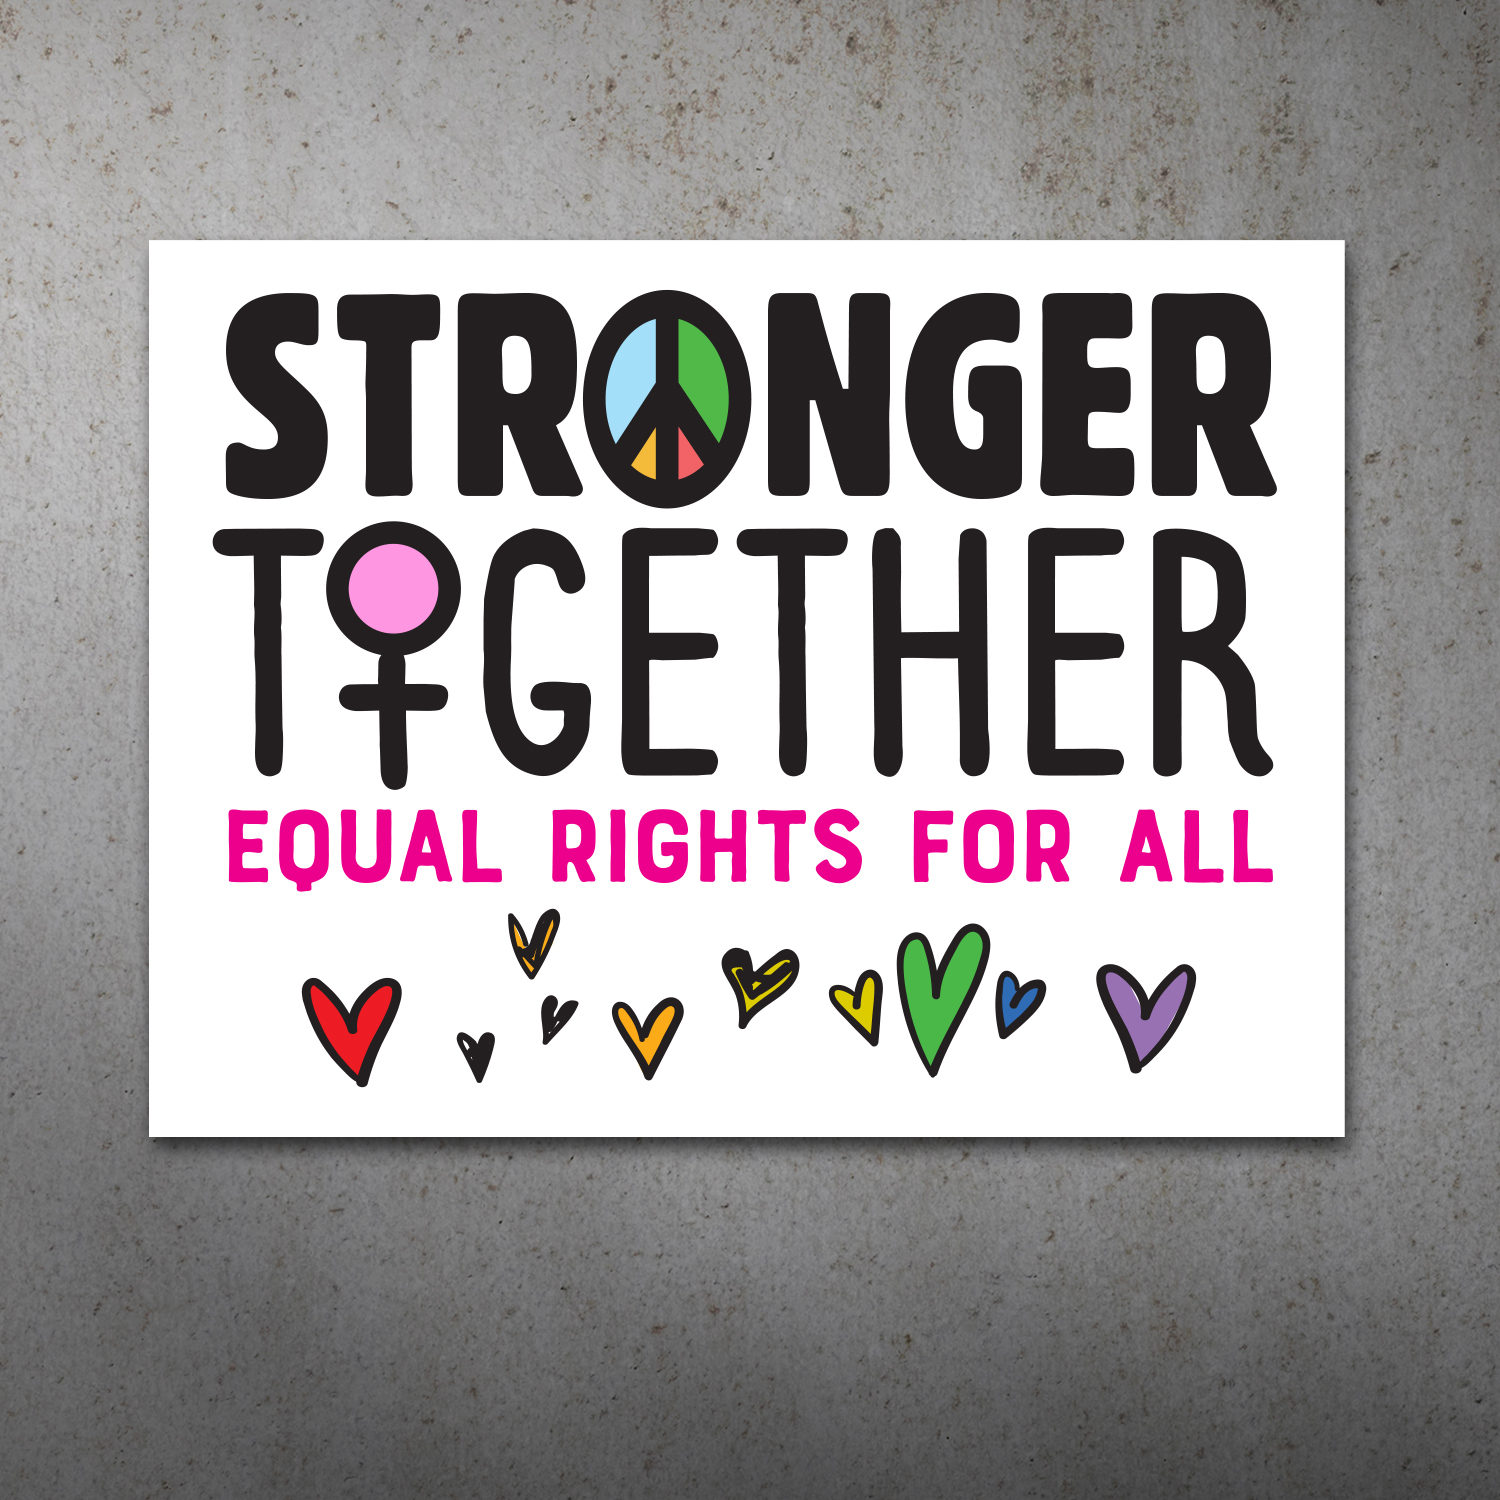 Stronger Together PRINTABLE Protest Poster   Women's March, Equal Rights Sign